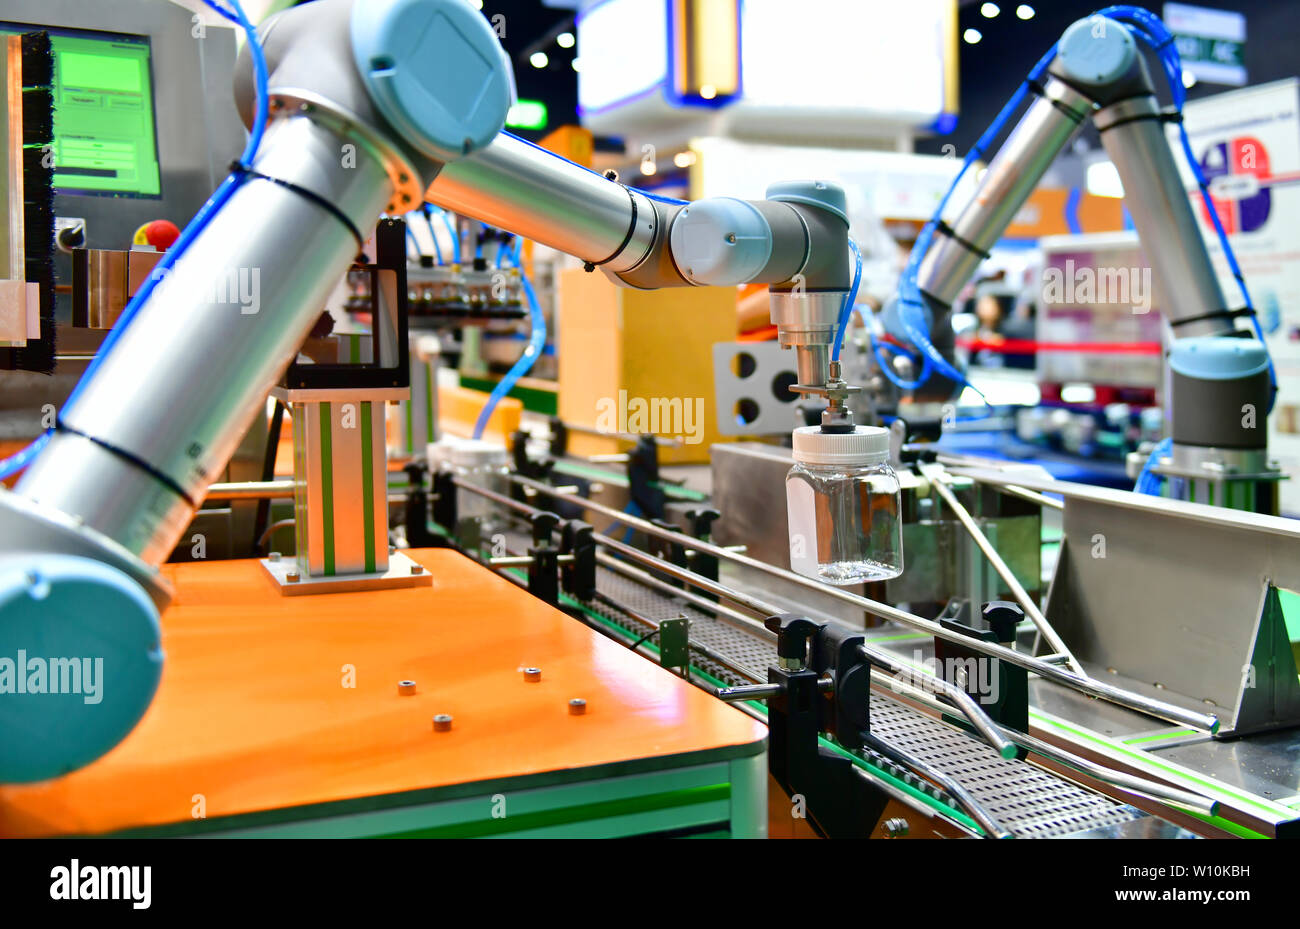 Robot arm arranged glass water bottle on Automatic industrial machinery equipment in production line factory Stock Photo